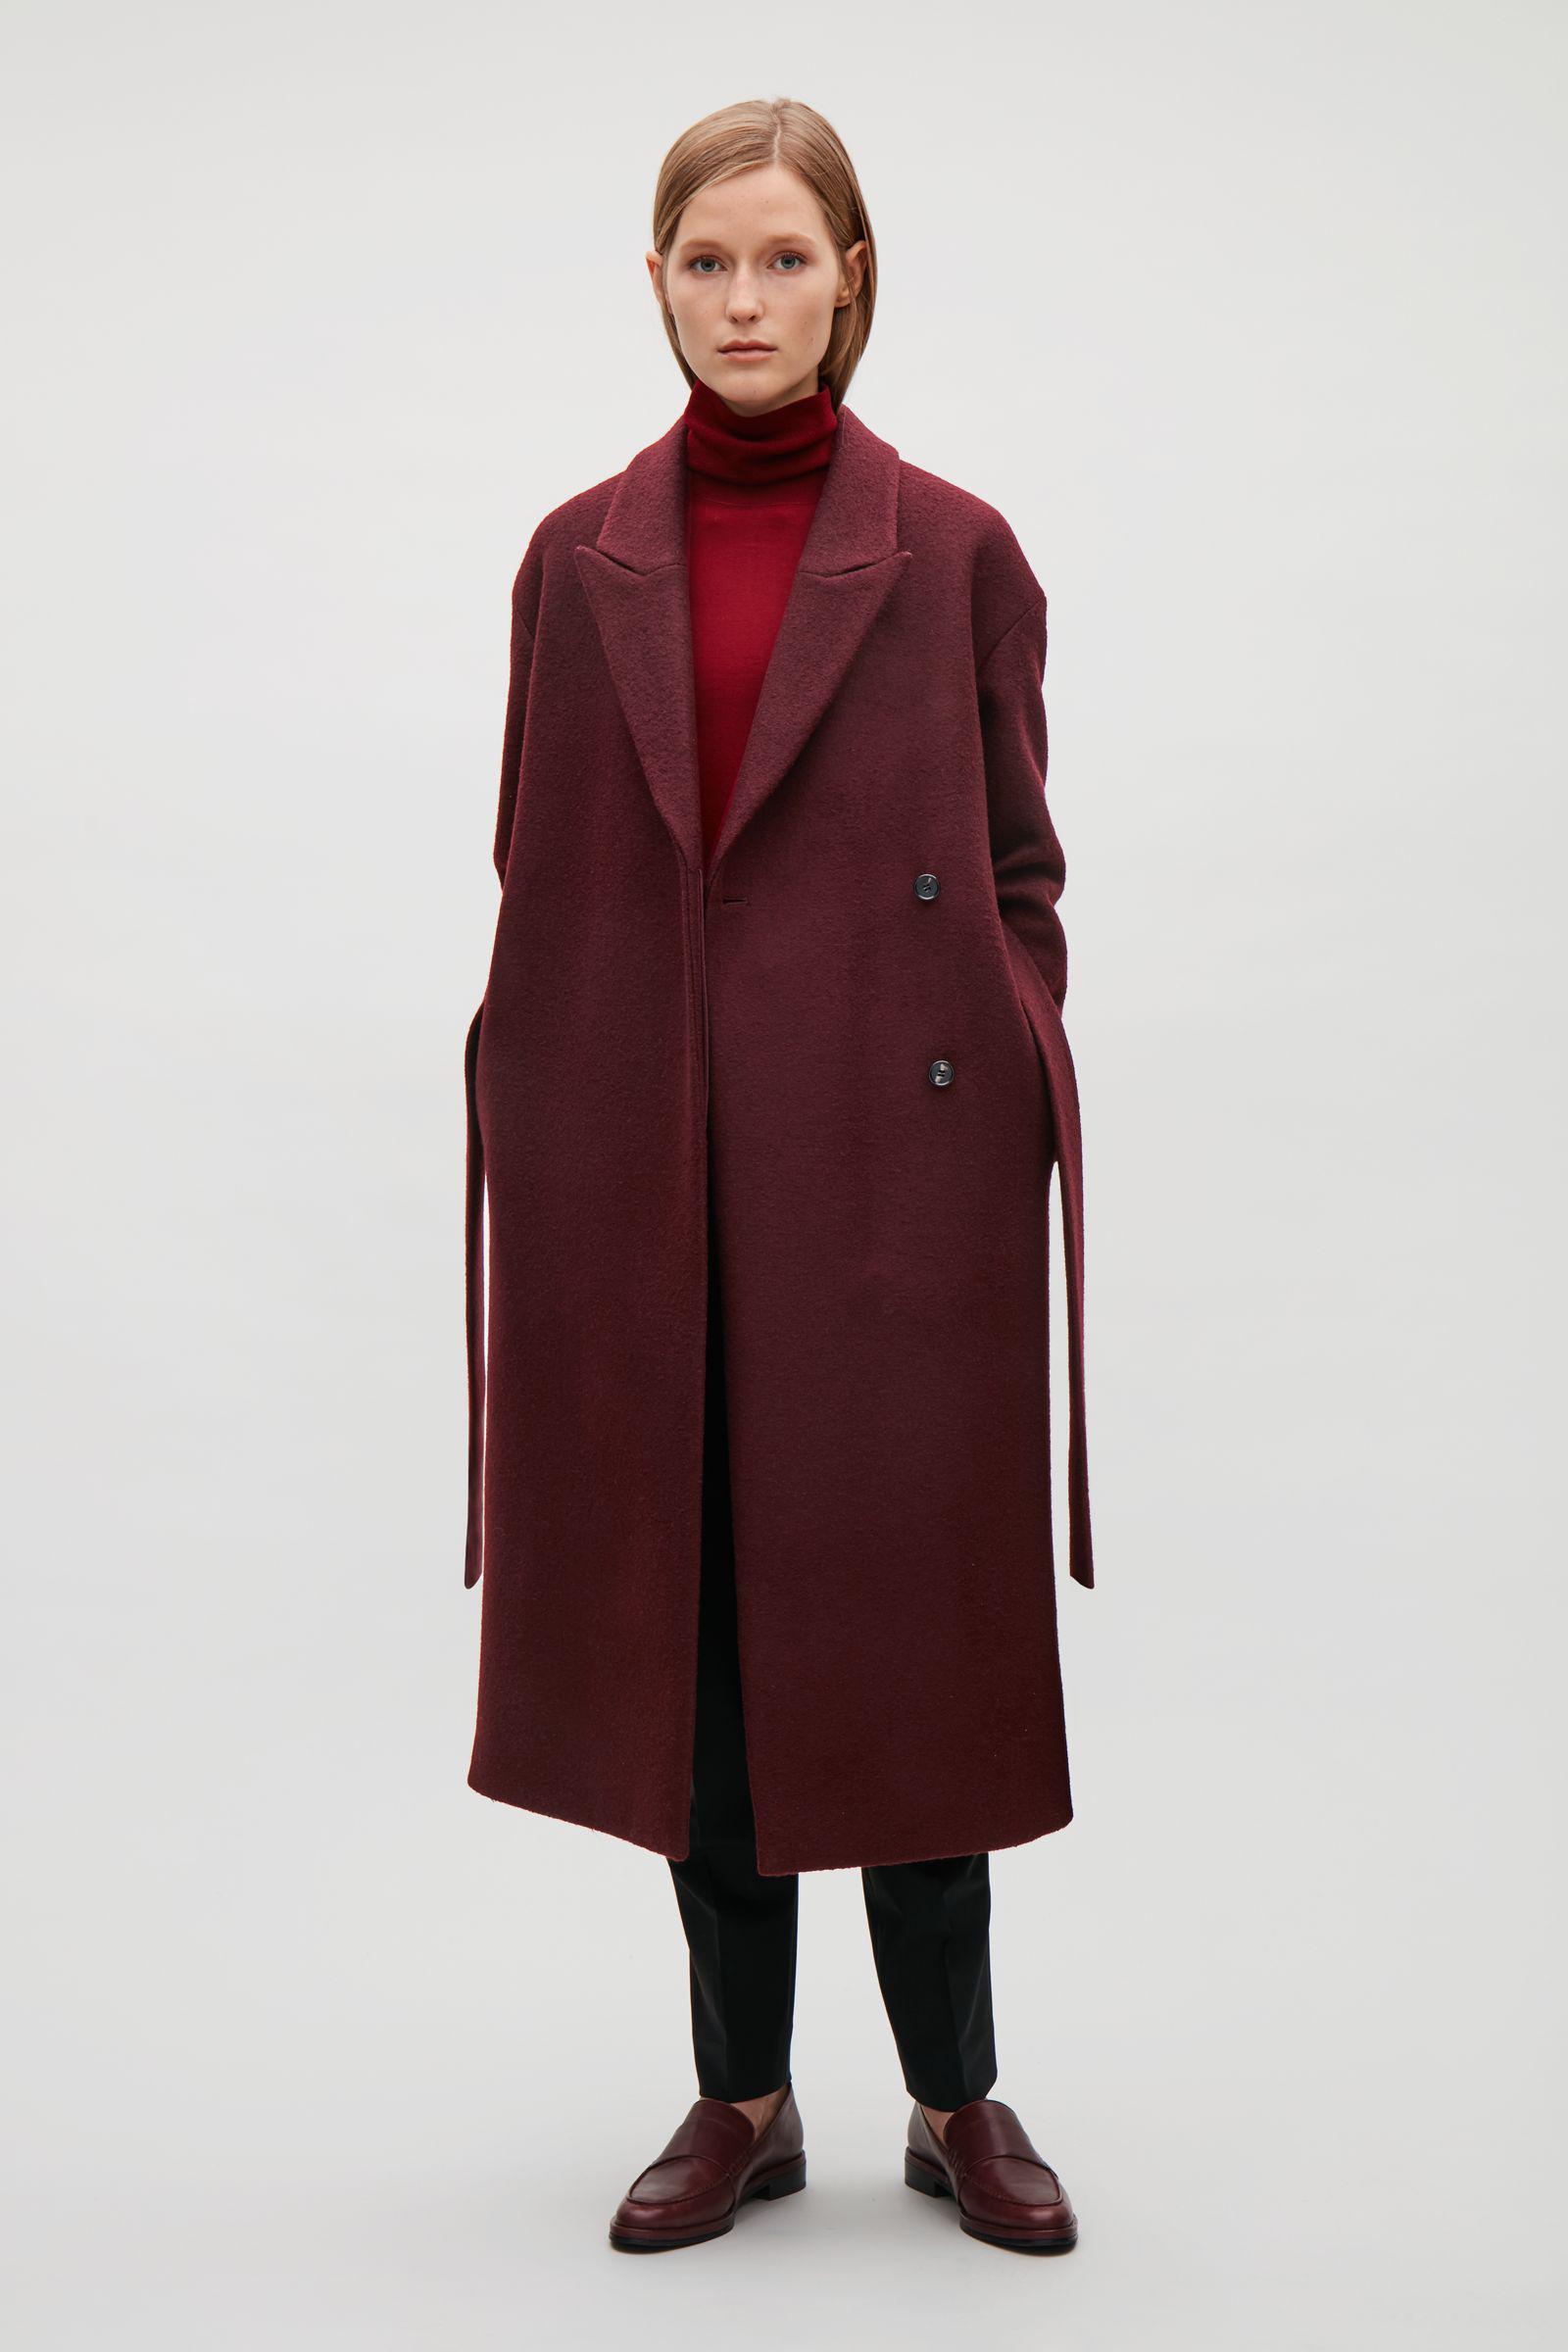 Lyst - Cos Belted Wool Coat in Red